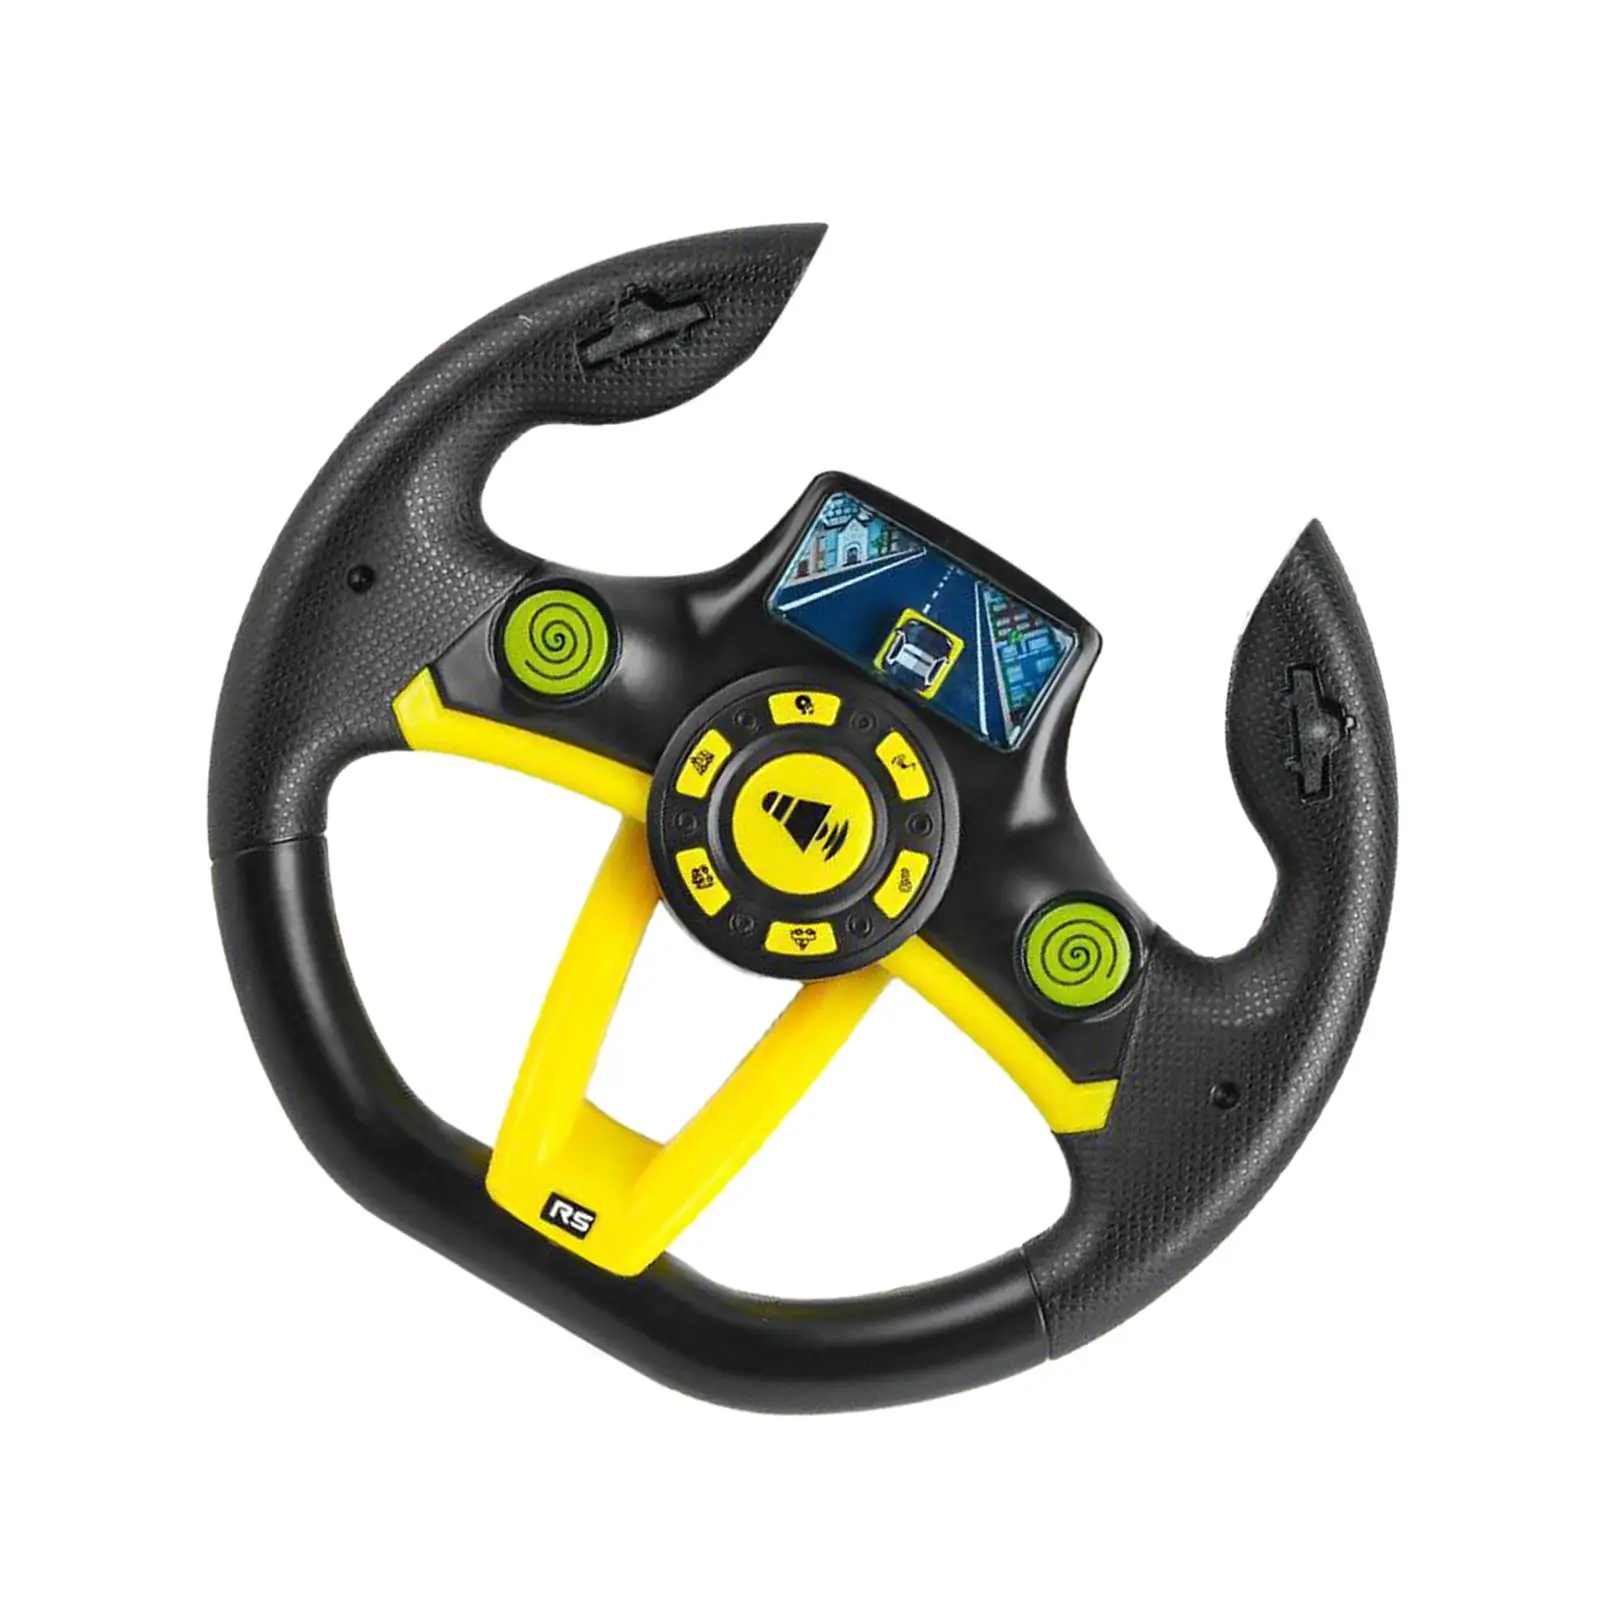 Round Steering Wheel Toy Musical Activity Toy Busy Board DIY Accessory for Outdoor Garden Busy Board Backyard Birthday Gifts